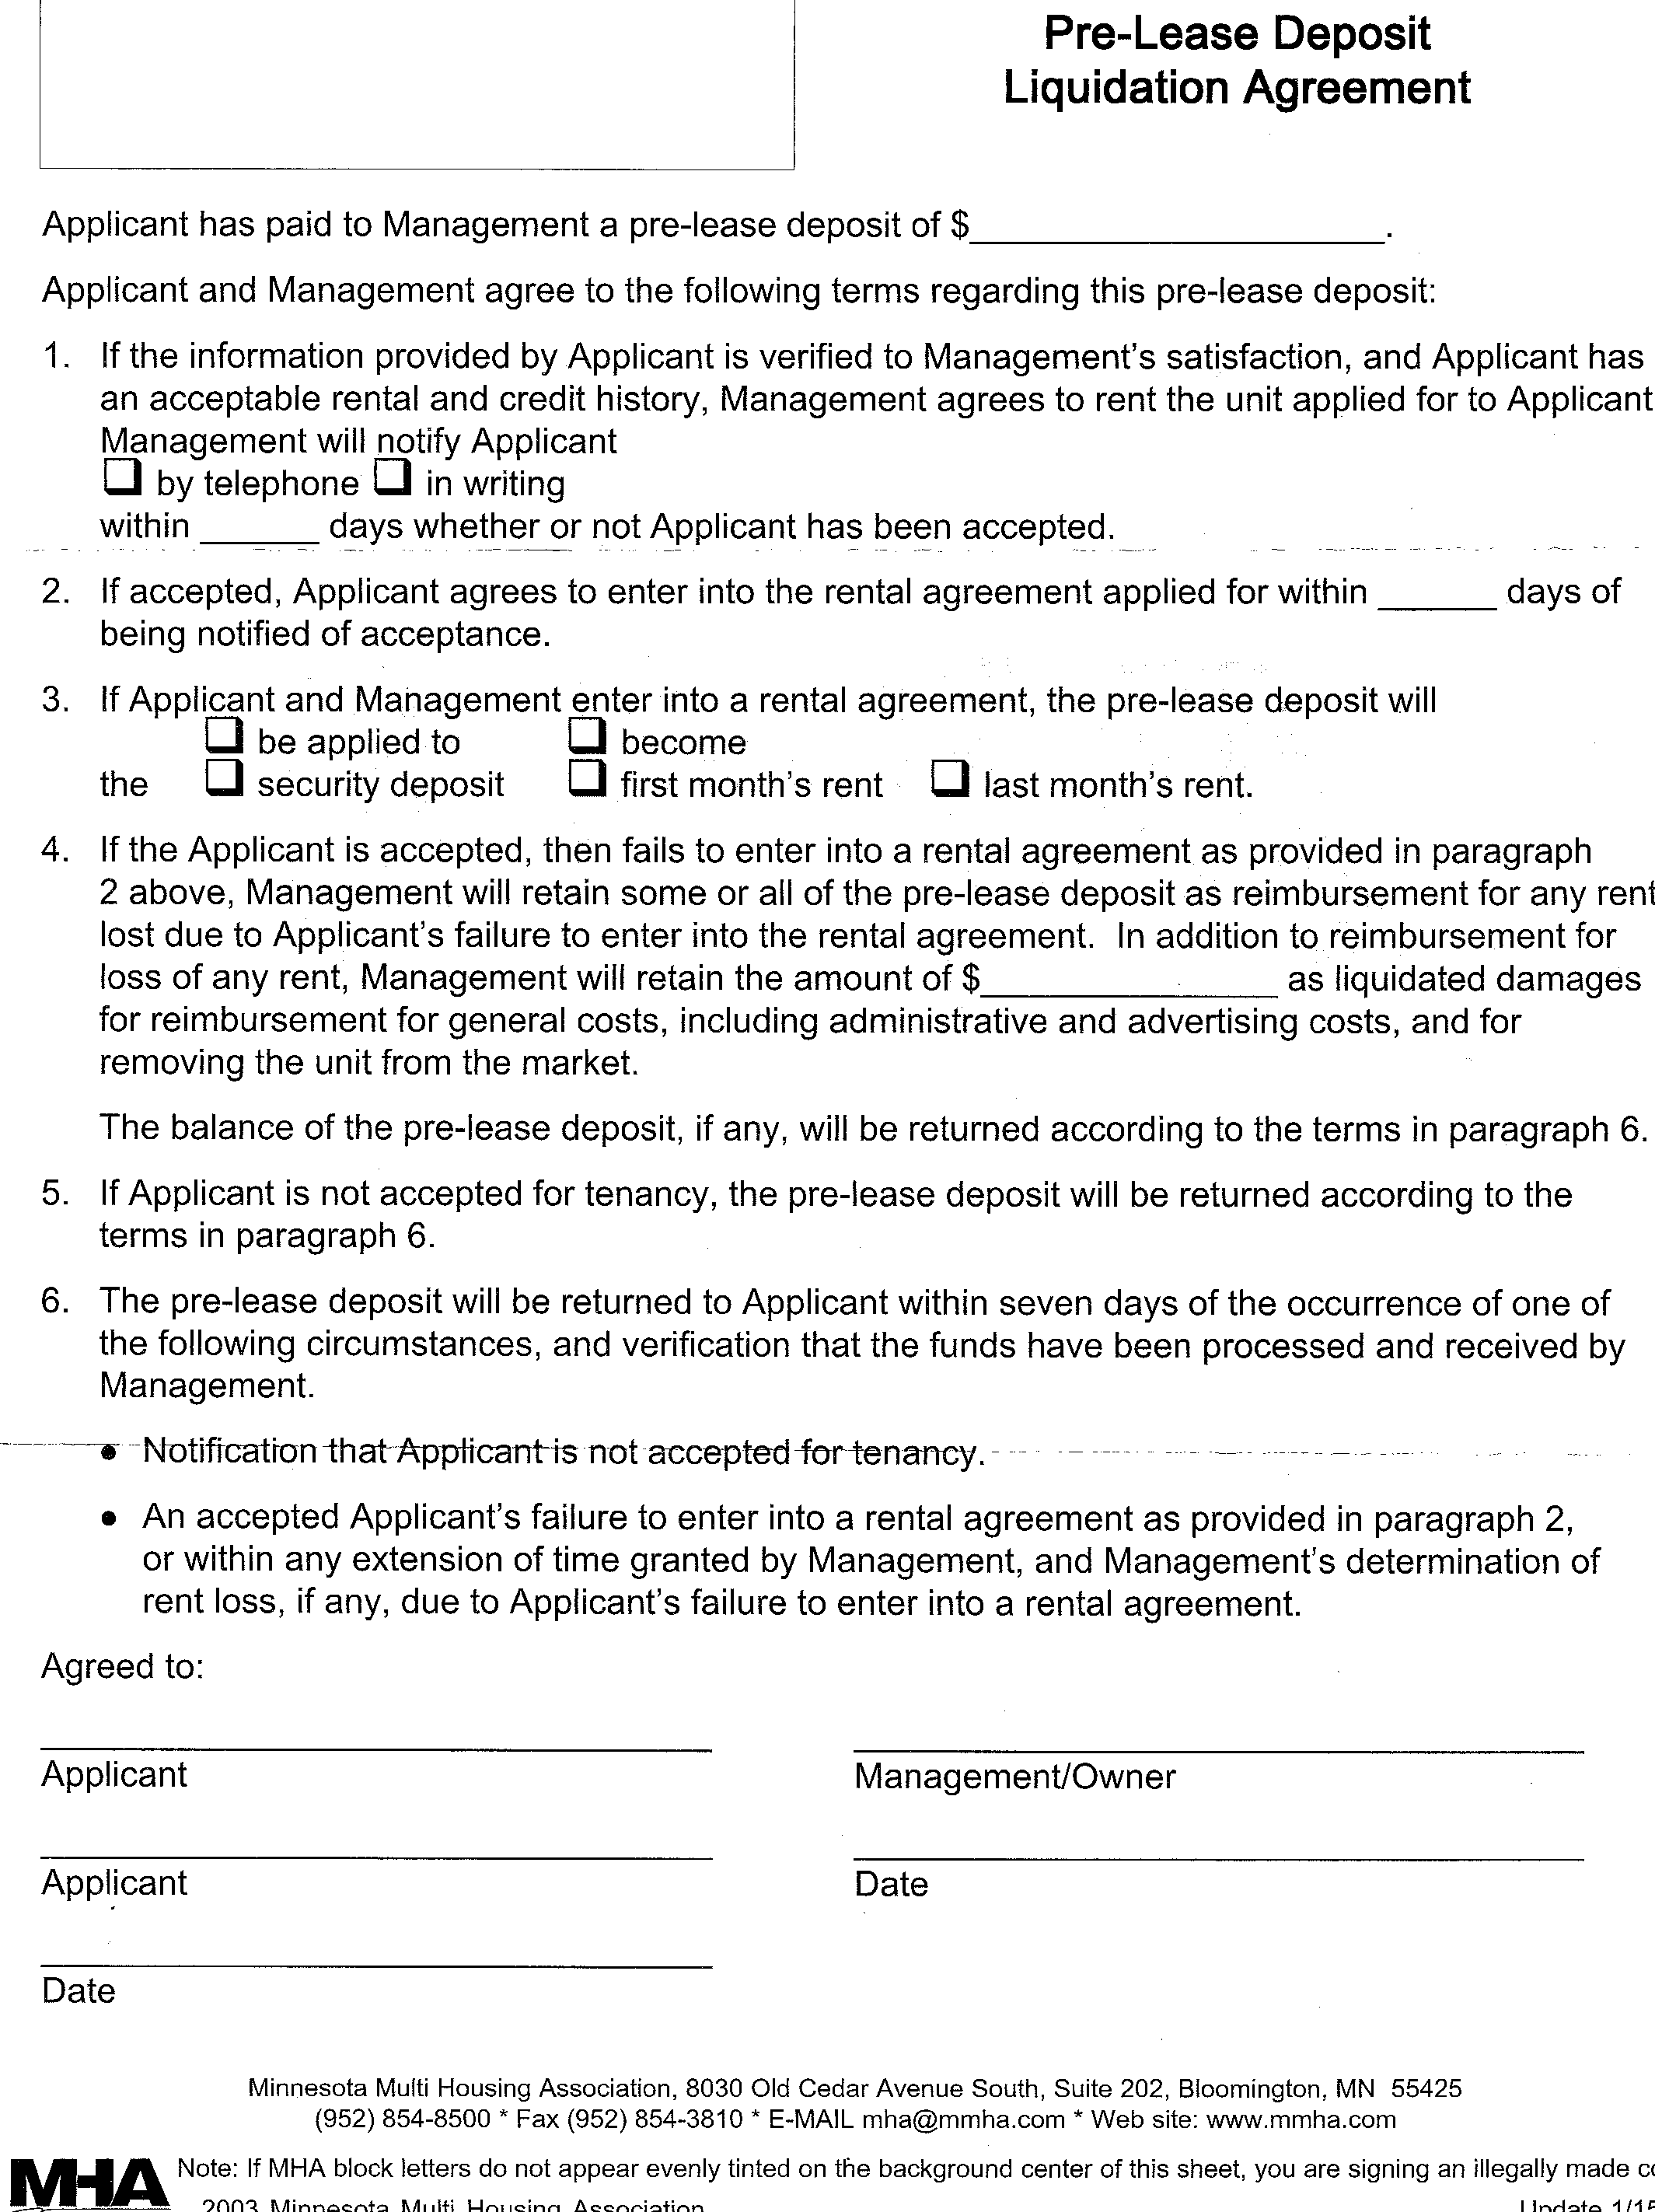 agreement-forms-free-printable-documents